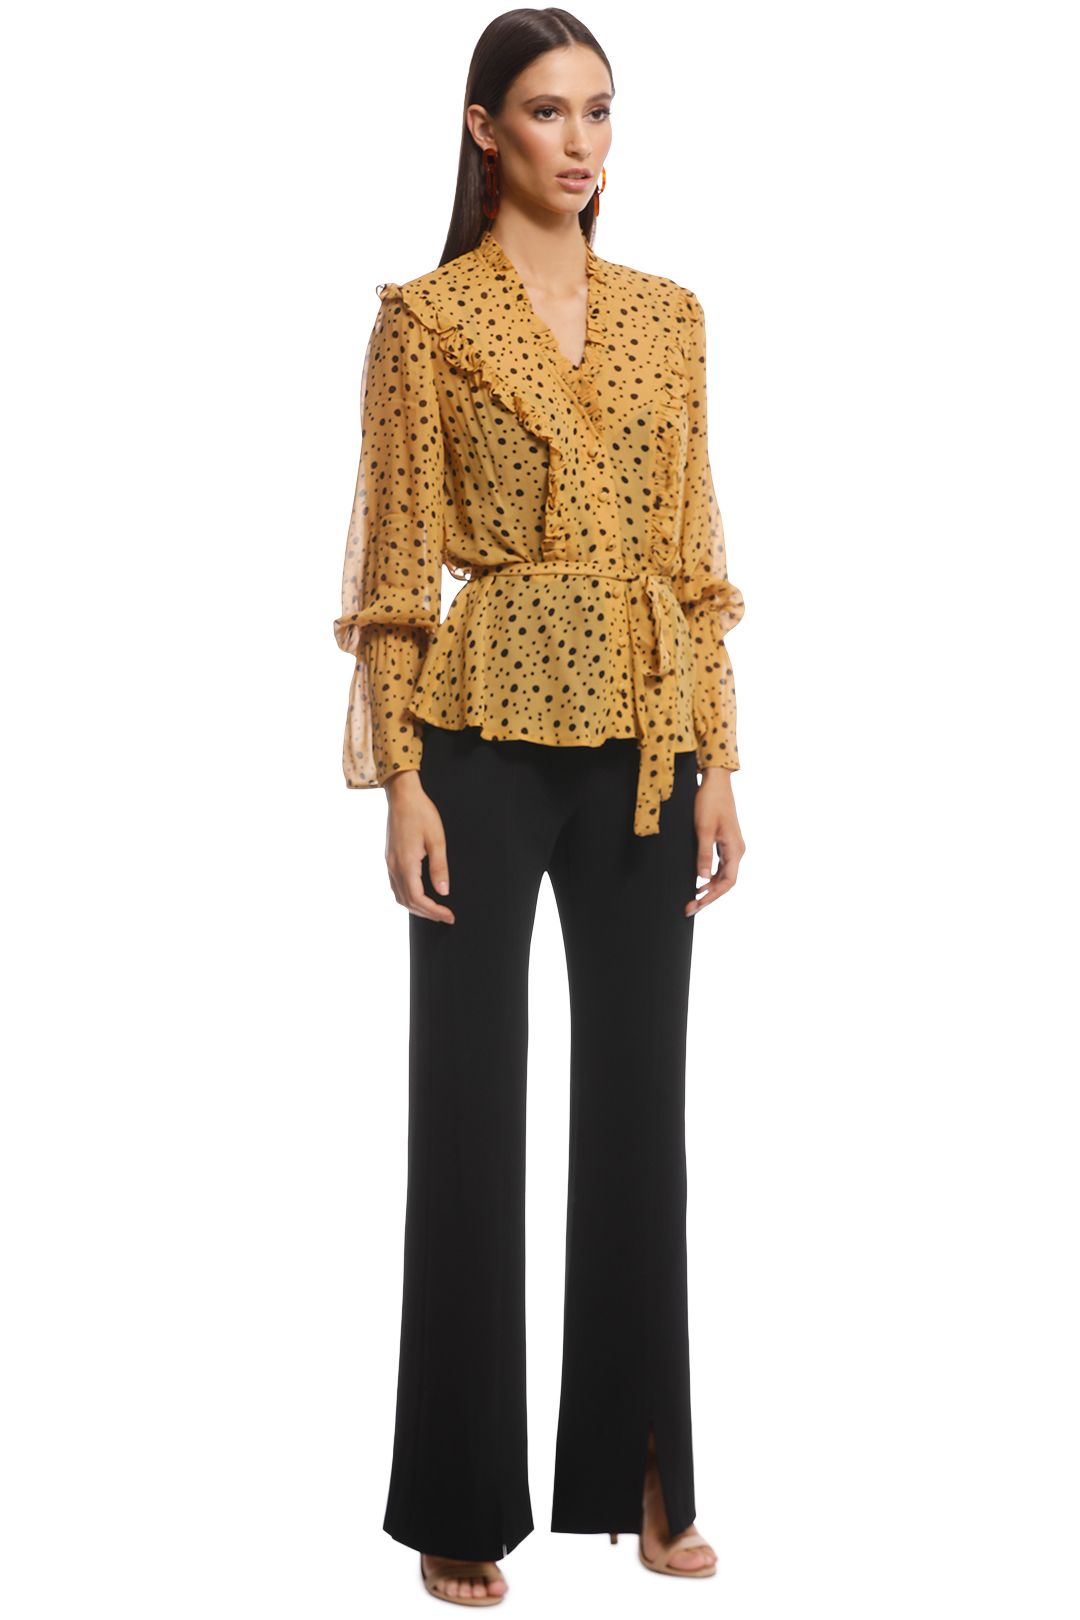 Ministry of Style - Songbird Top - Yellow Polkadot - Side